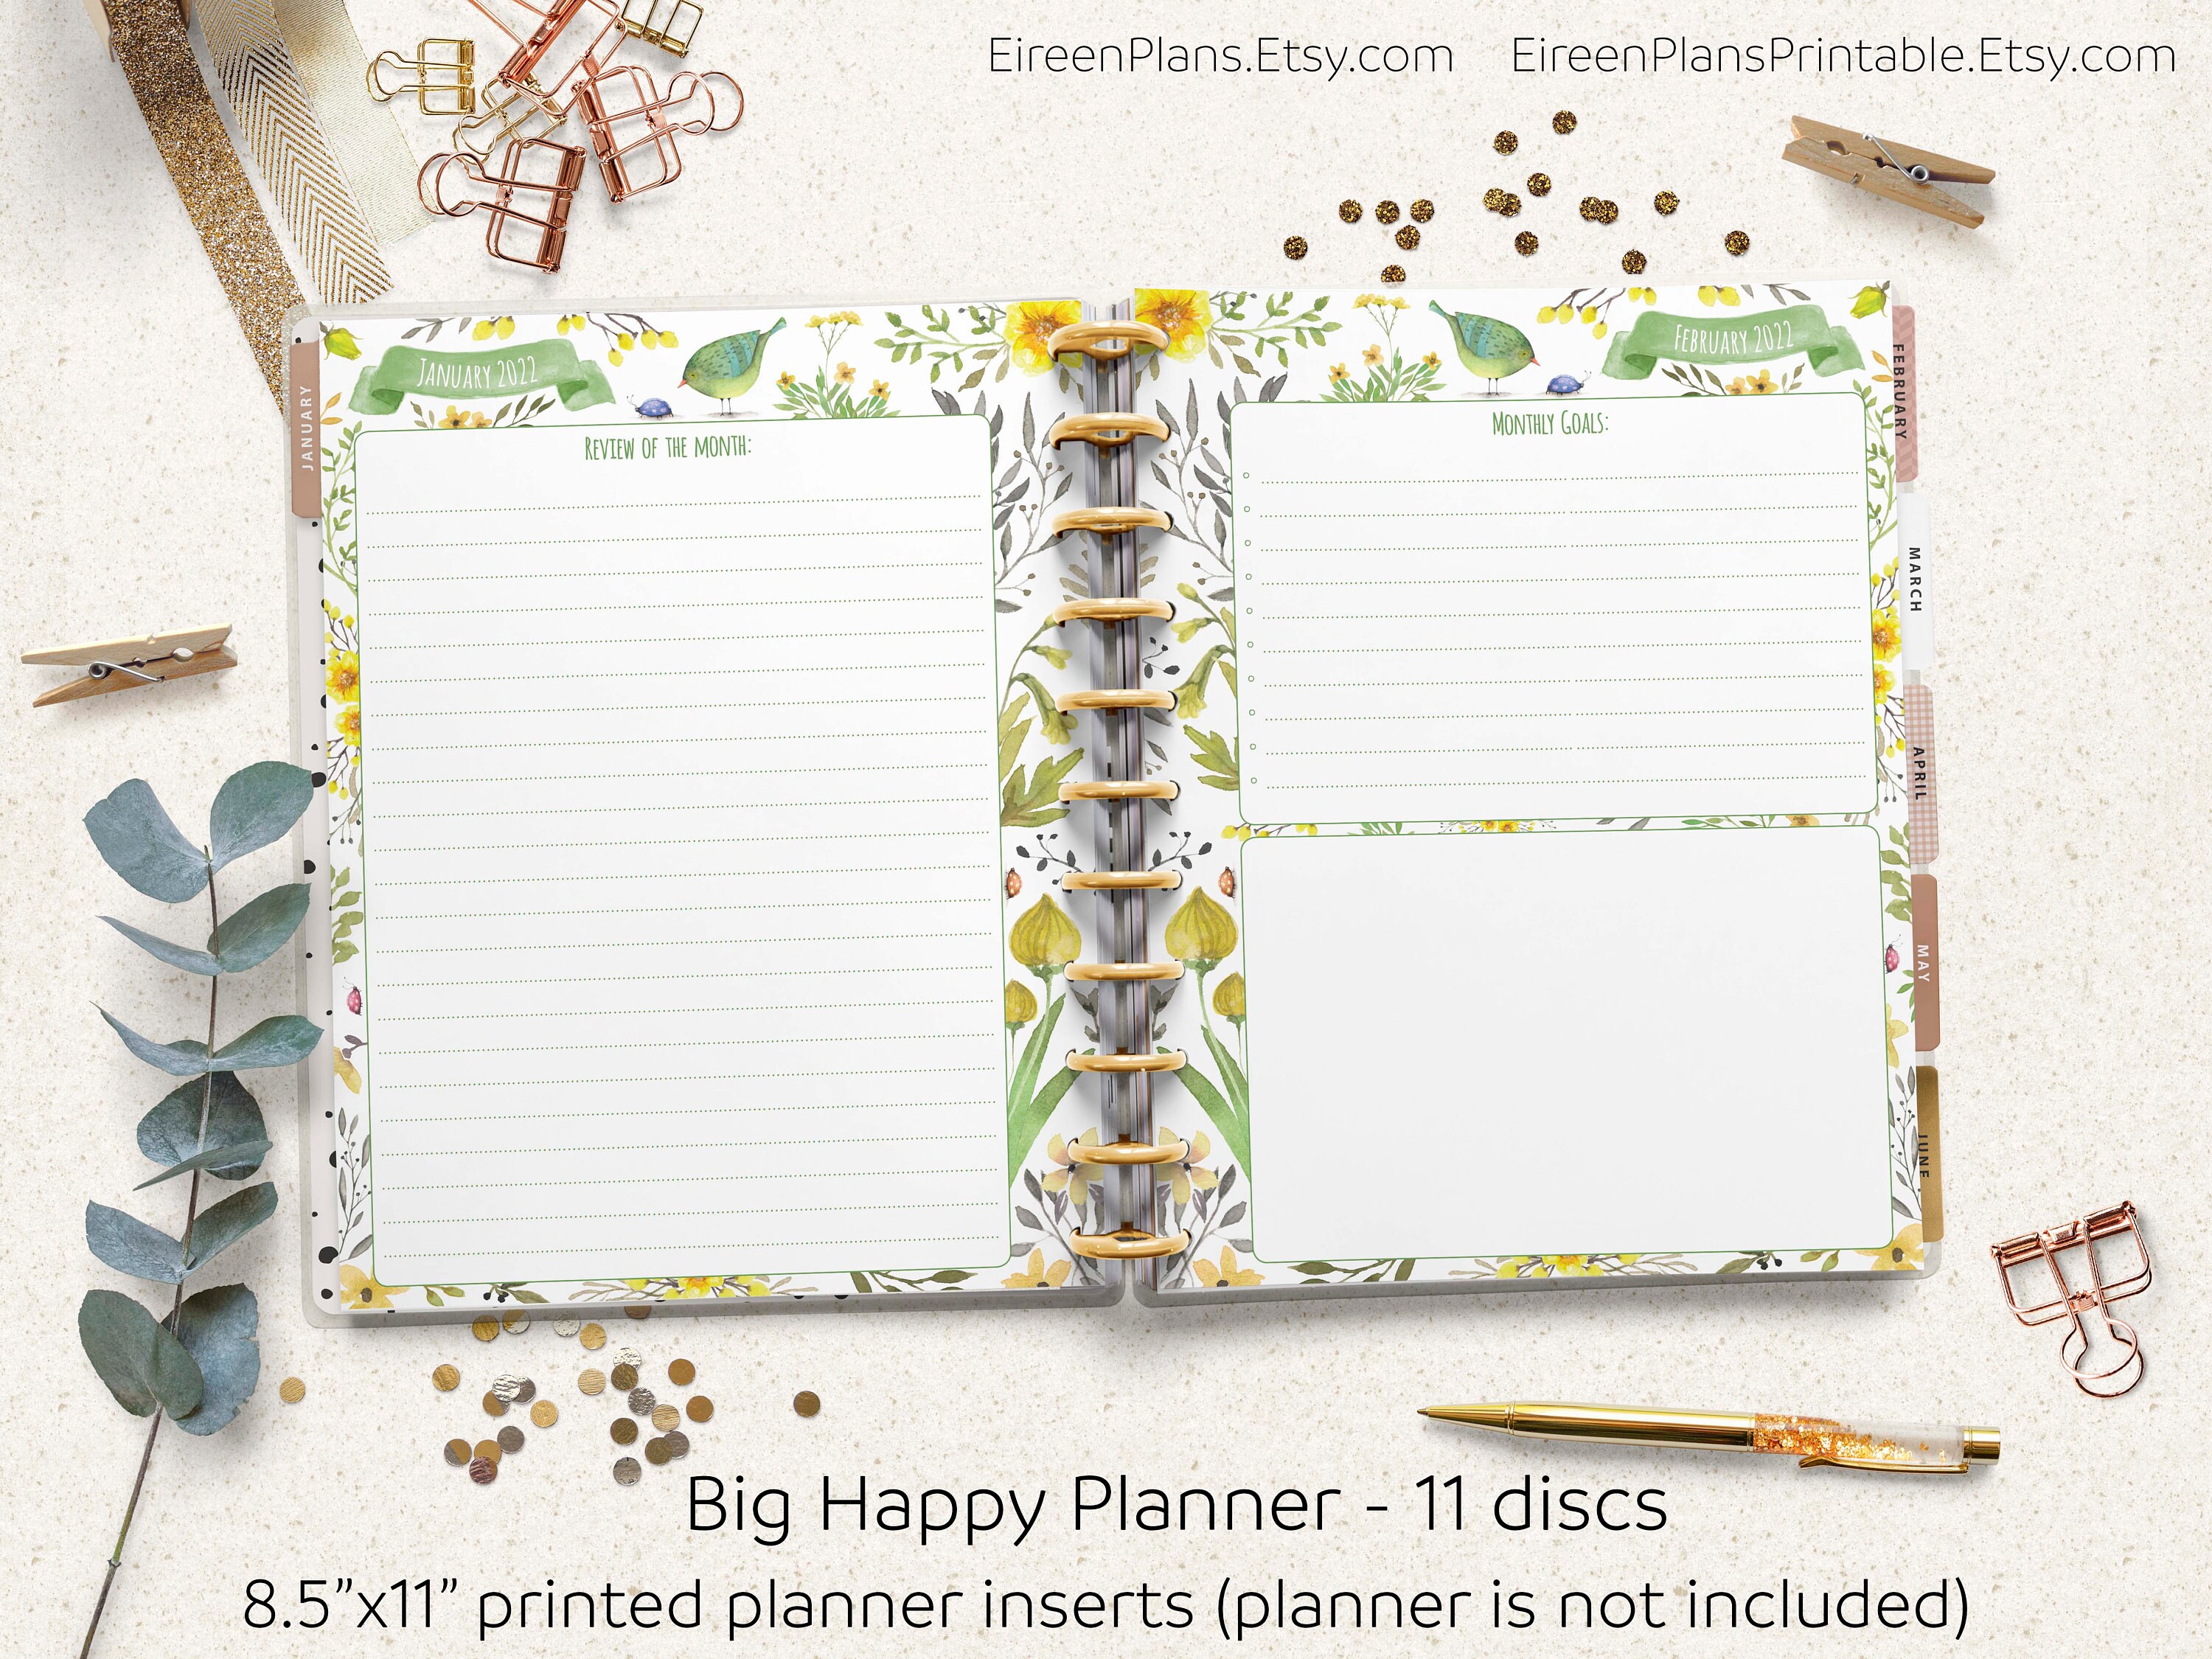 2022-2023-2024-2025-2026-printed-monthly-big-happy-planner-etsy